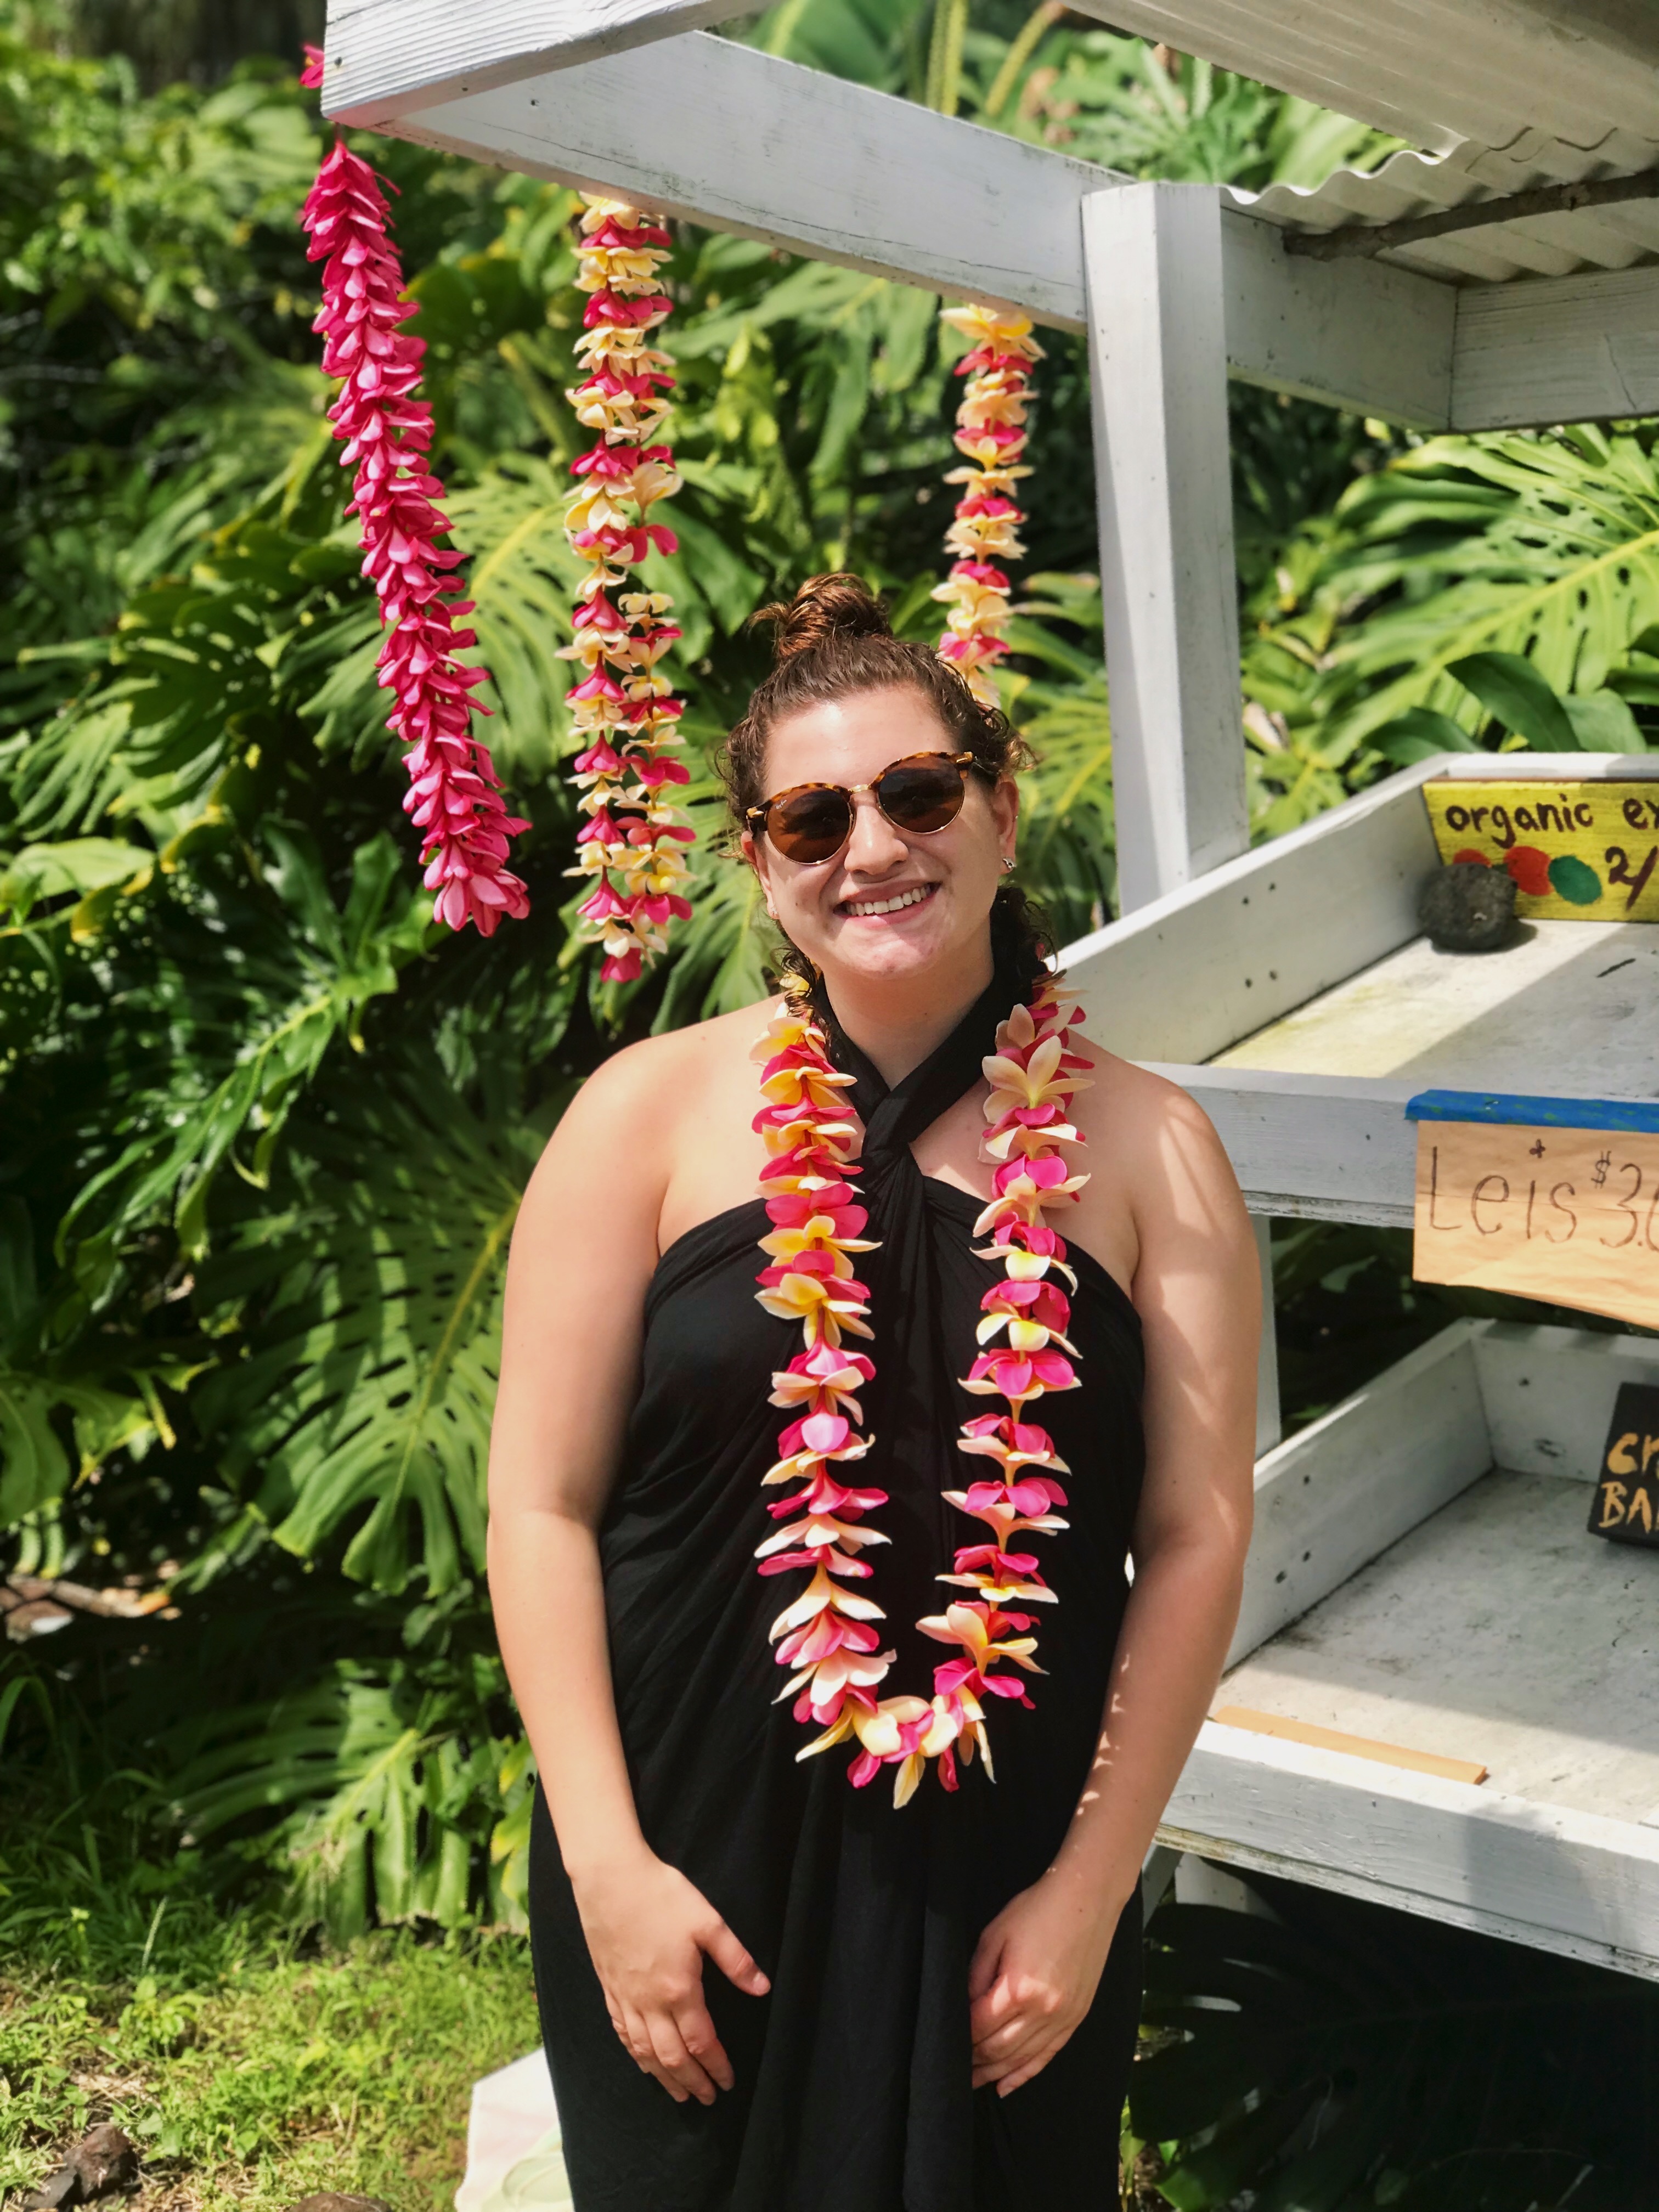 I have a lei around my neck in Kona, Hawaii.